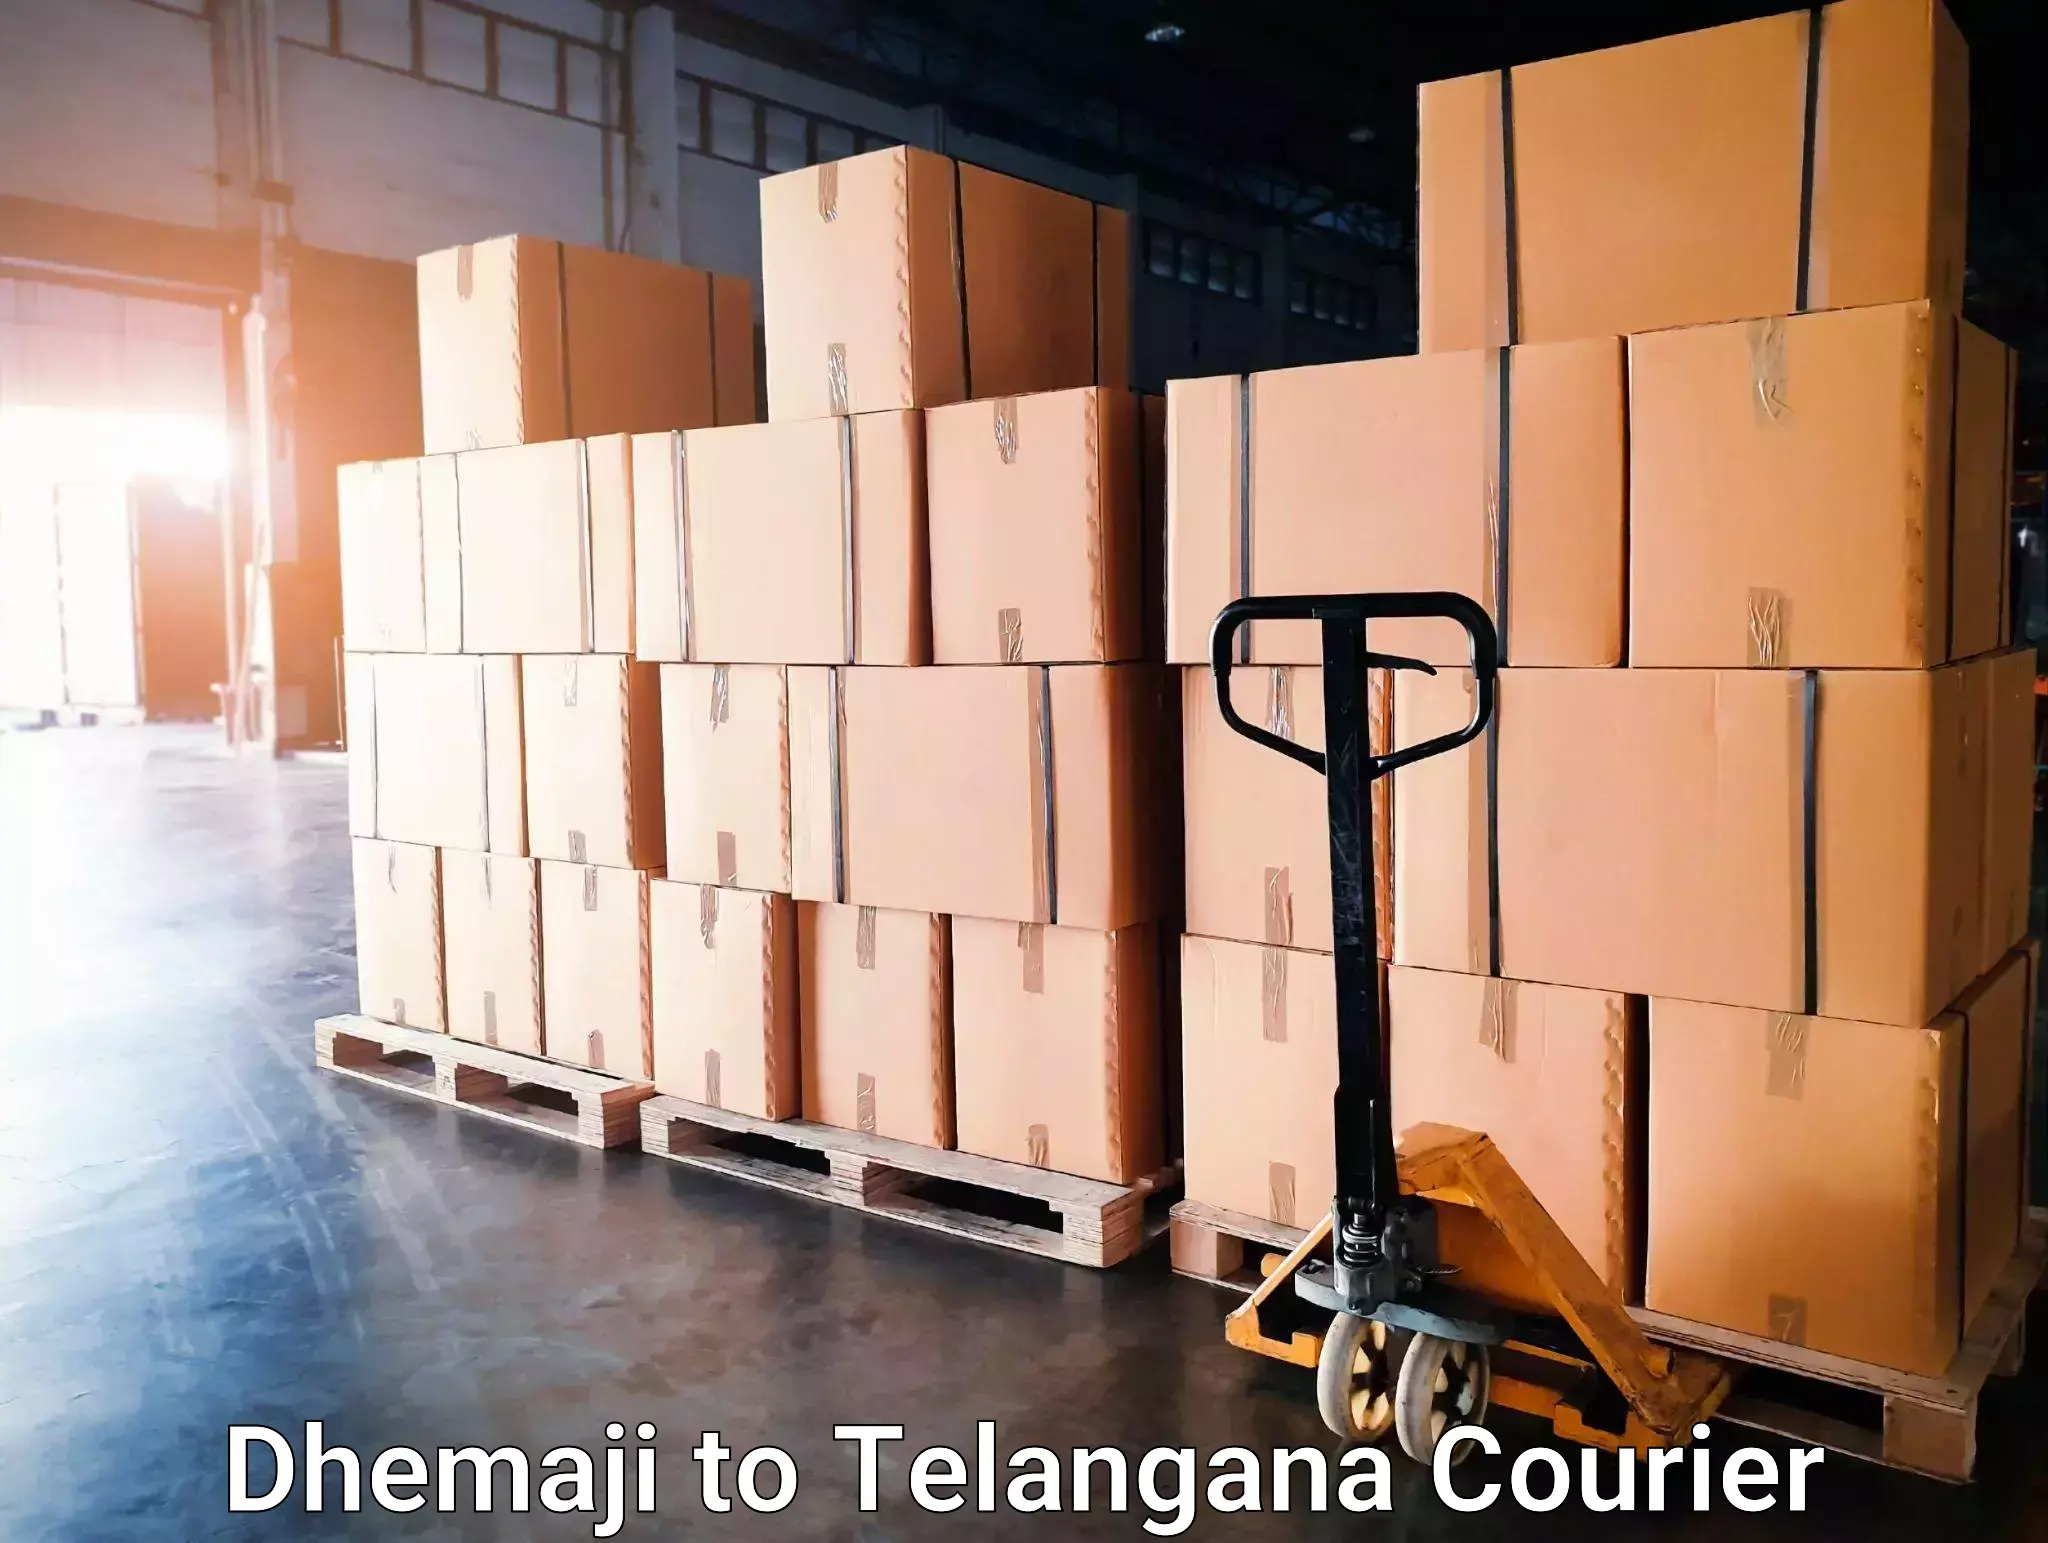 Parcel service for businesses Dhemaji to Siddipet